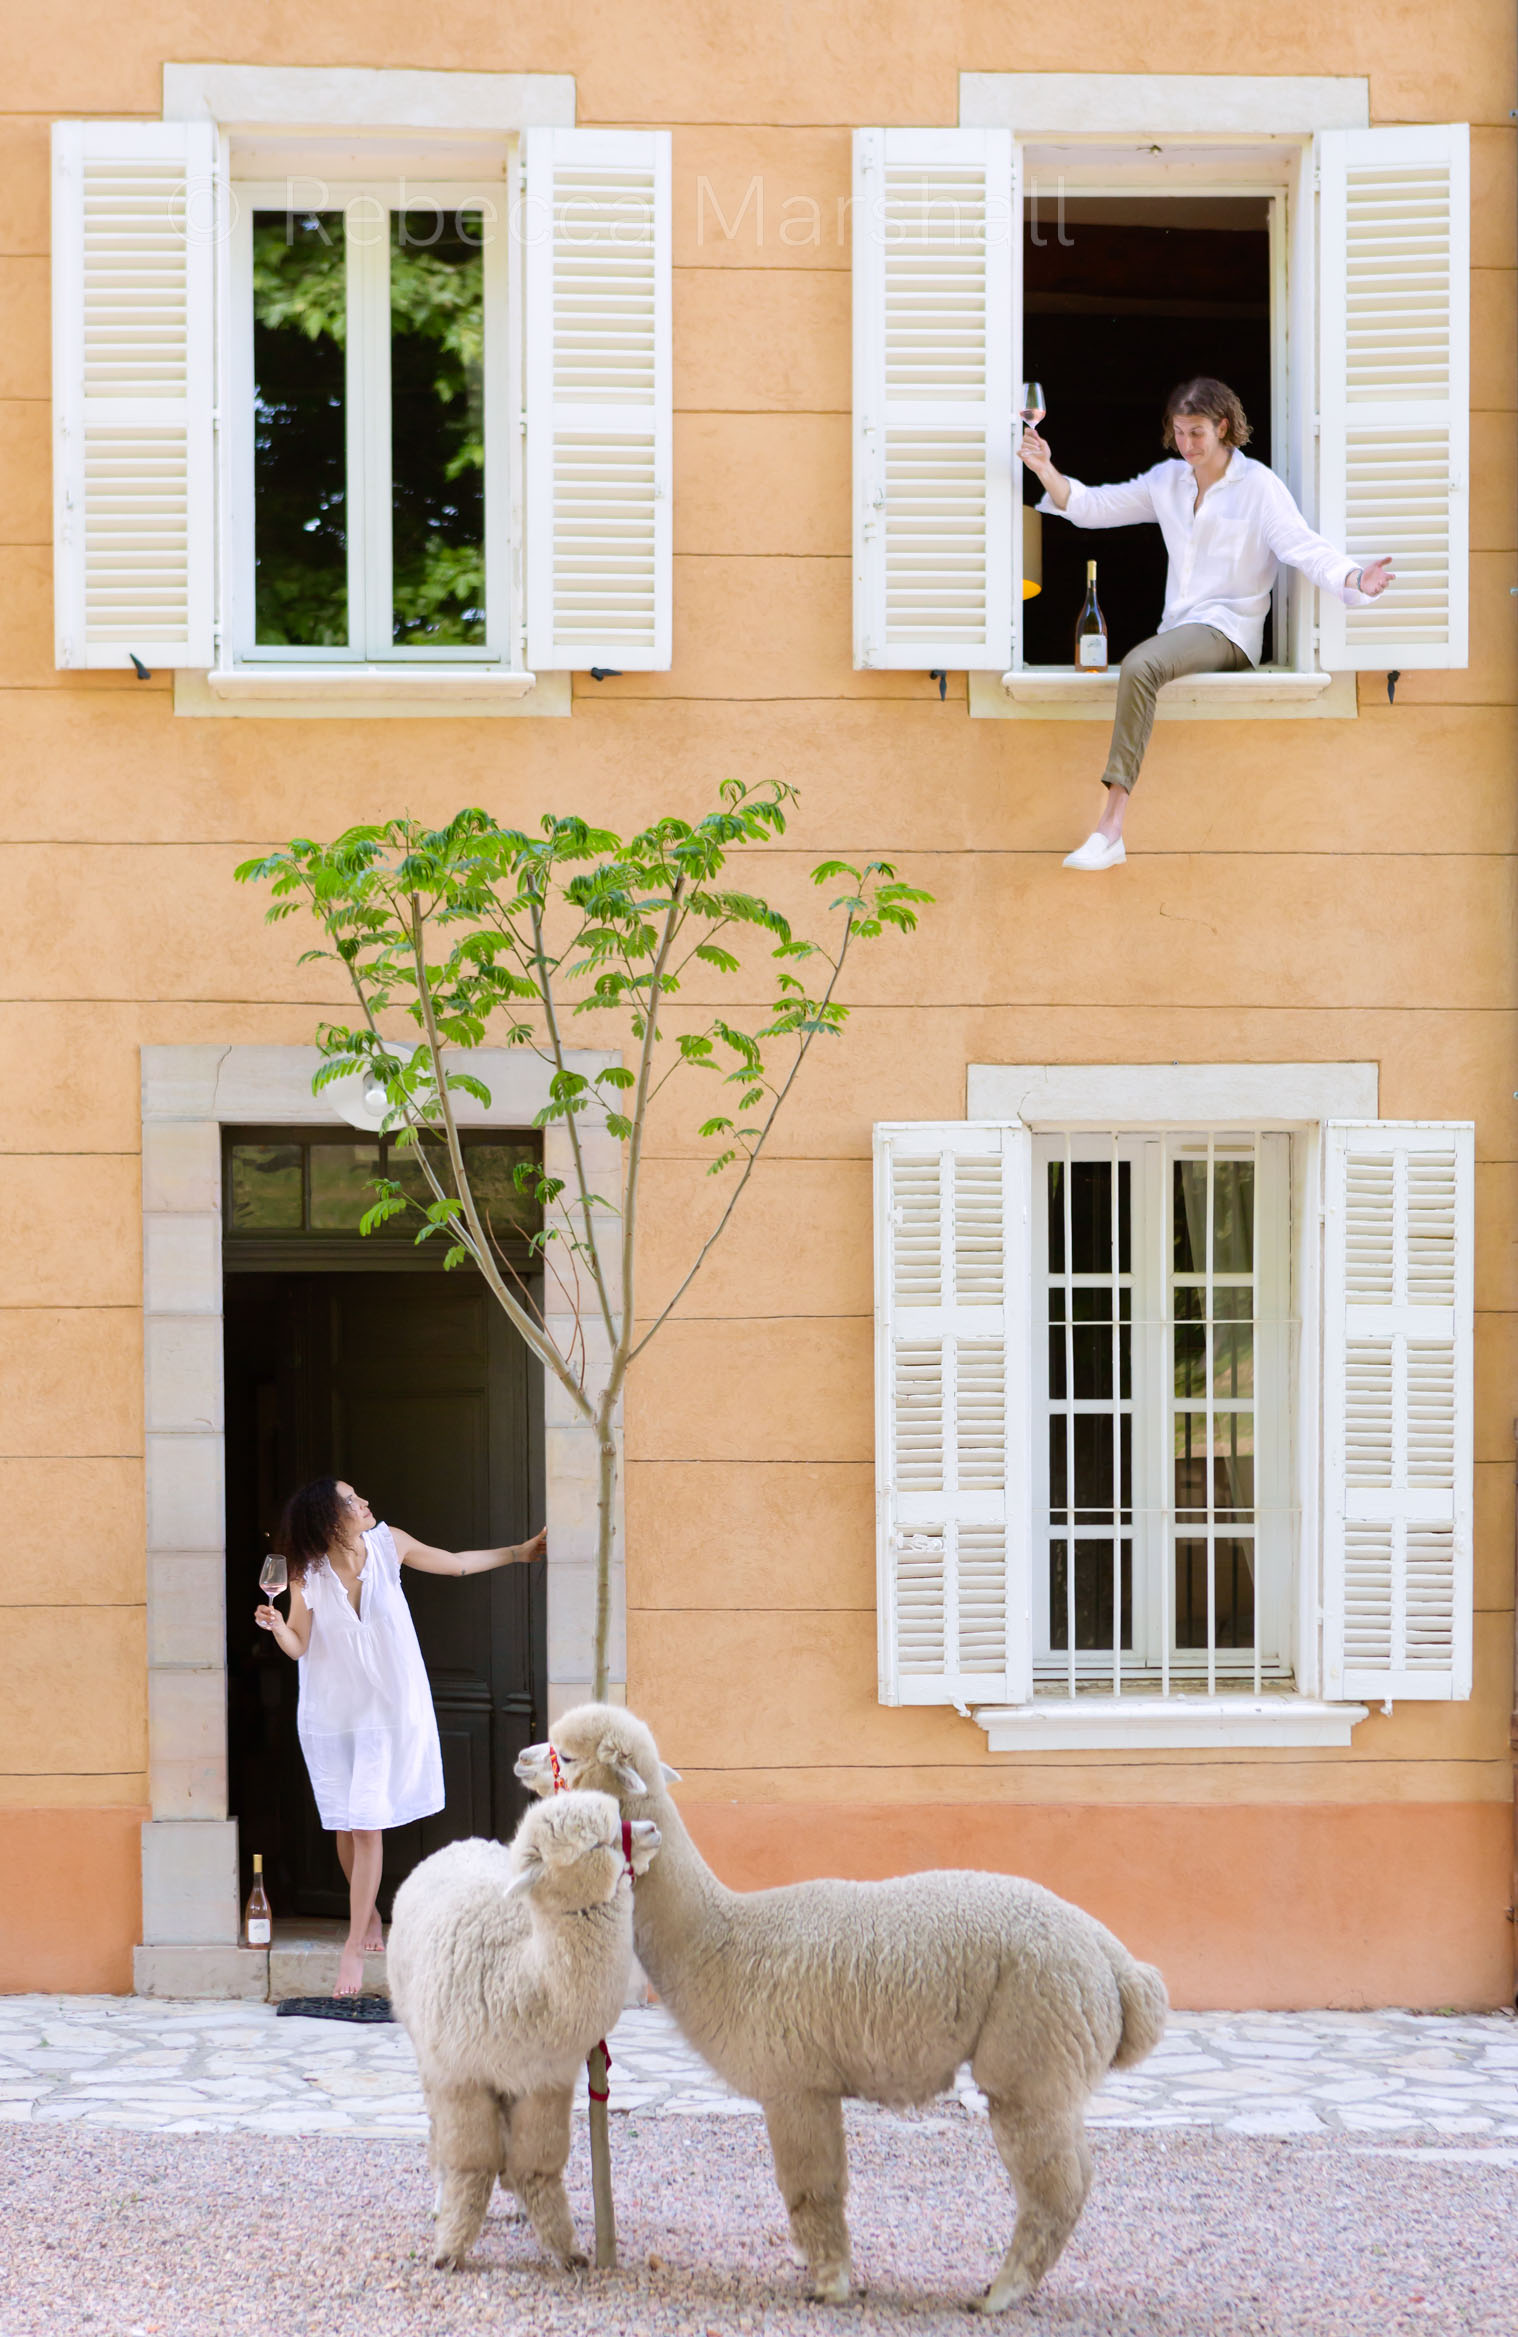 A couple in the windows of a French castle with two llamas tied to a tree in the foreground